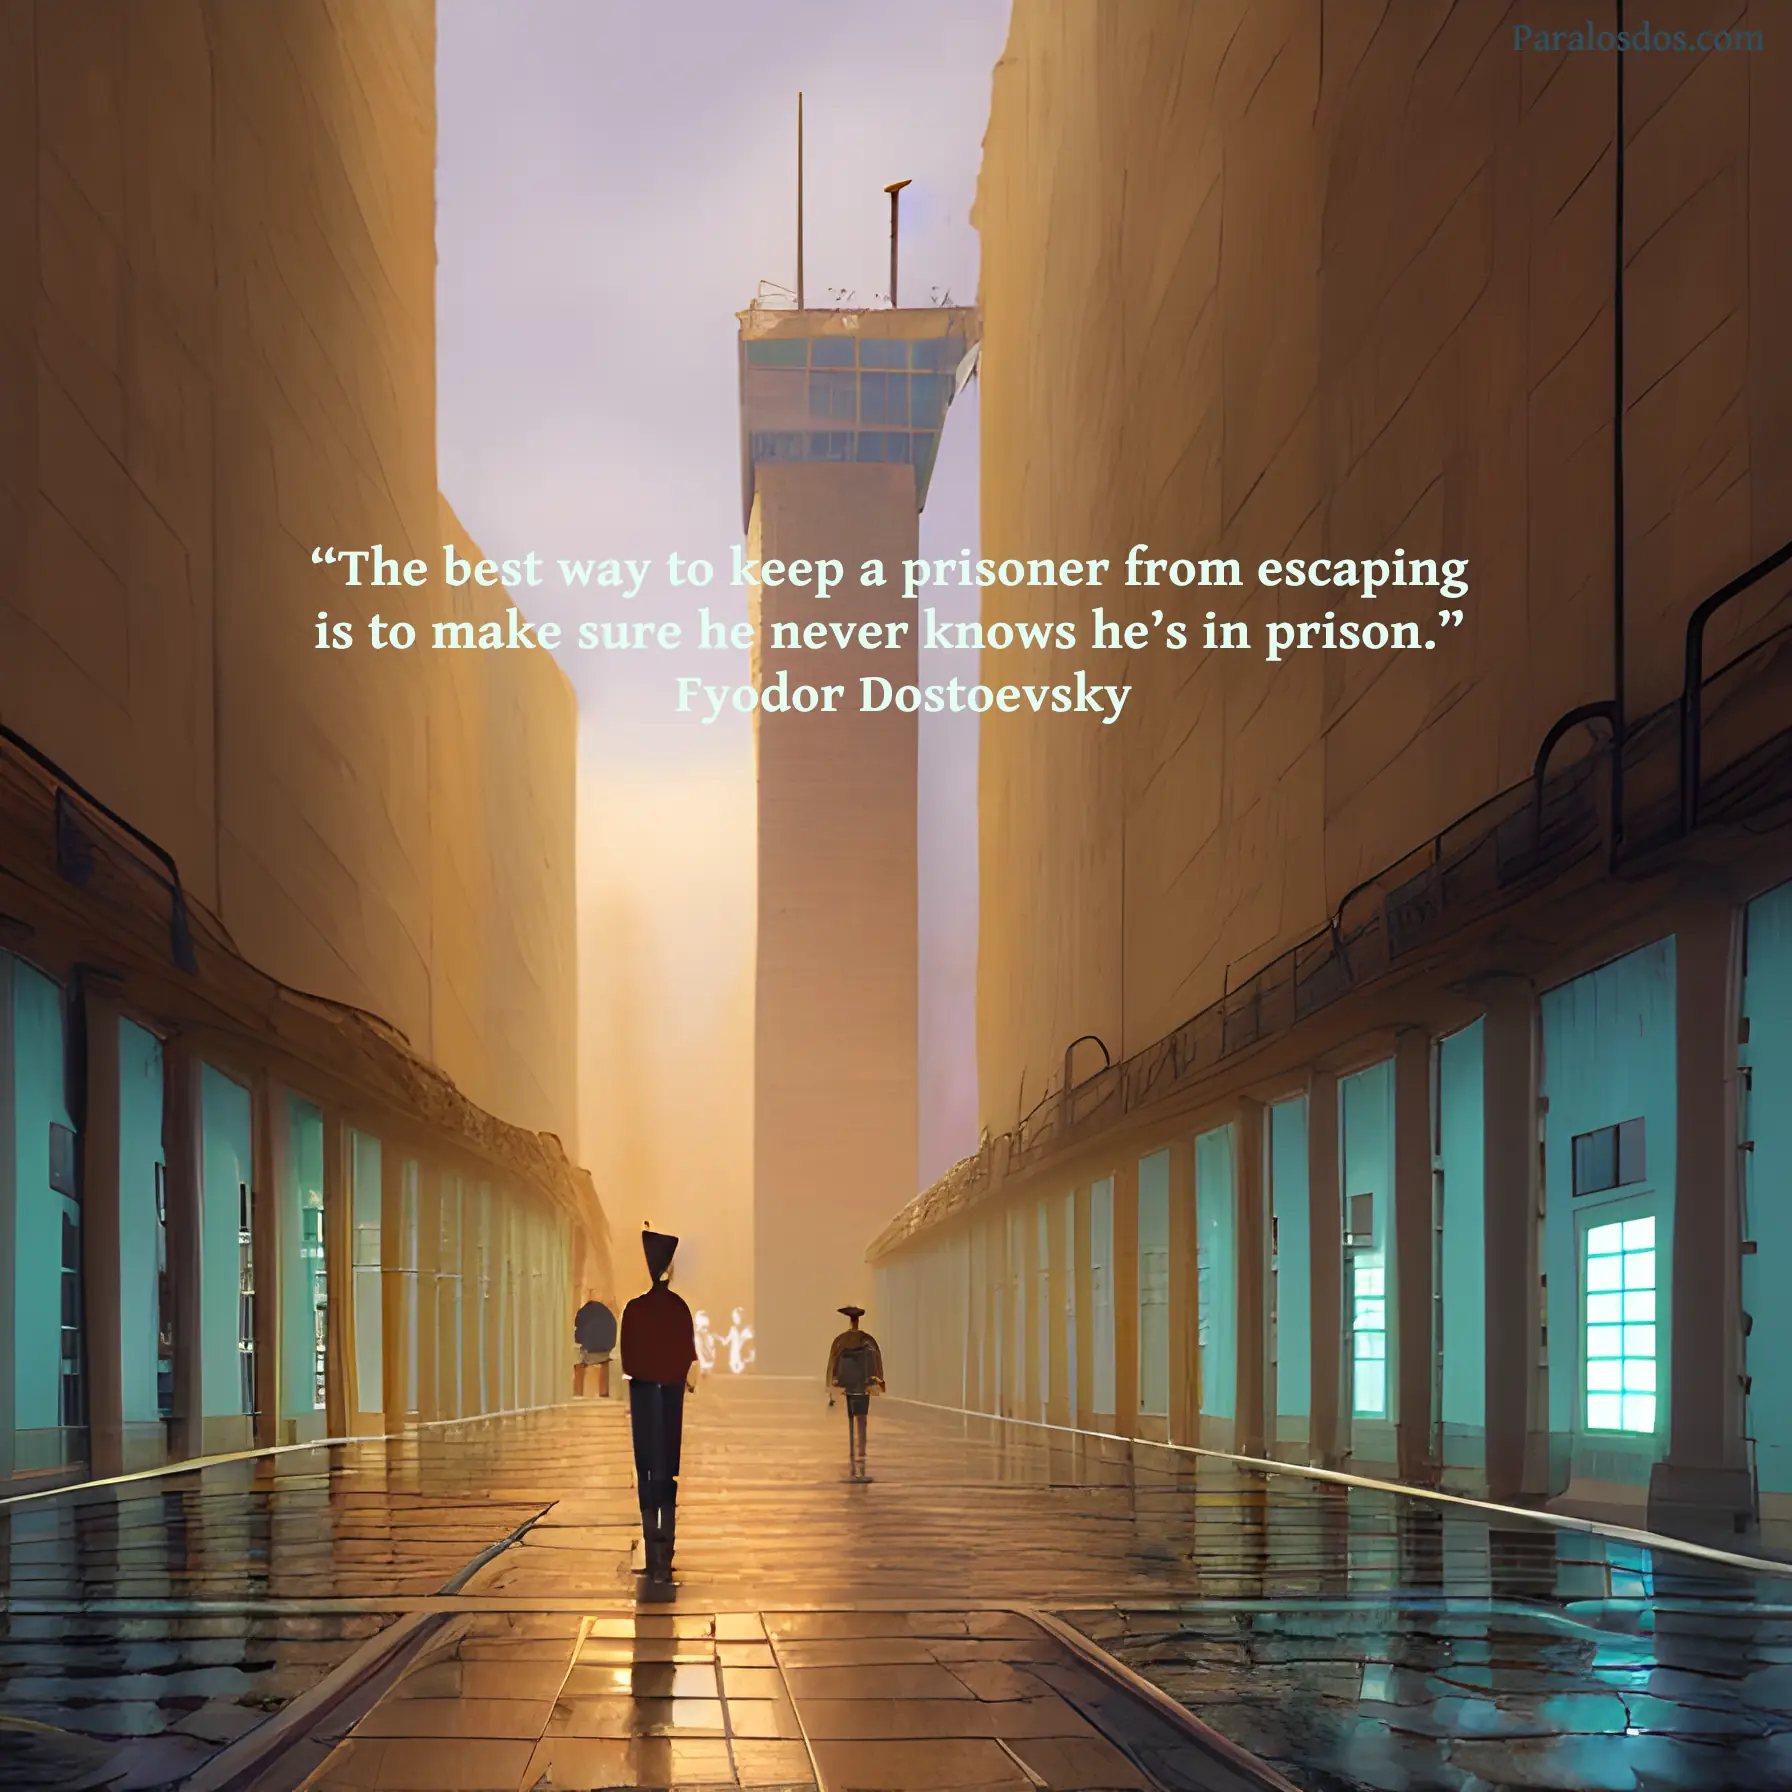 An artistic rendering of people walk in a sombre place. It could be a prison courtyard, it could be a pedestrian path between commercial and business buildings. The quote reds: “The best way to keep a prisoner from escaping is to make sure he never knows he’s in prison.” Fyodor Dostoevsky